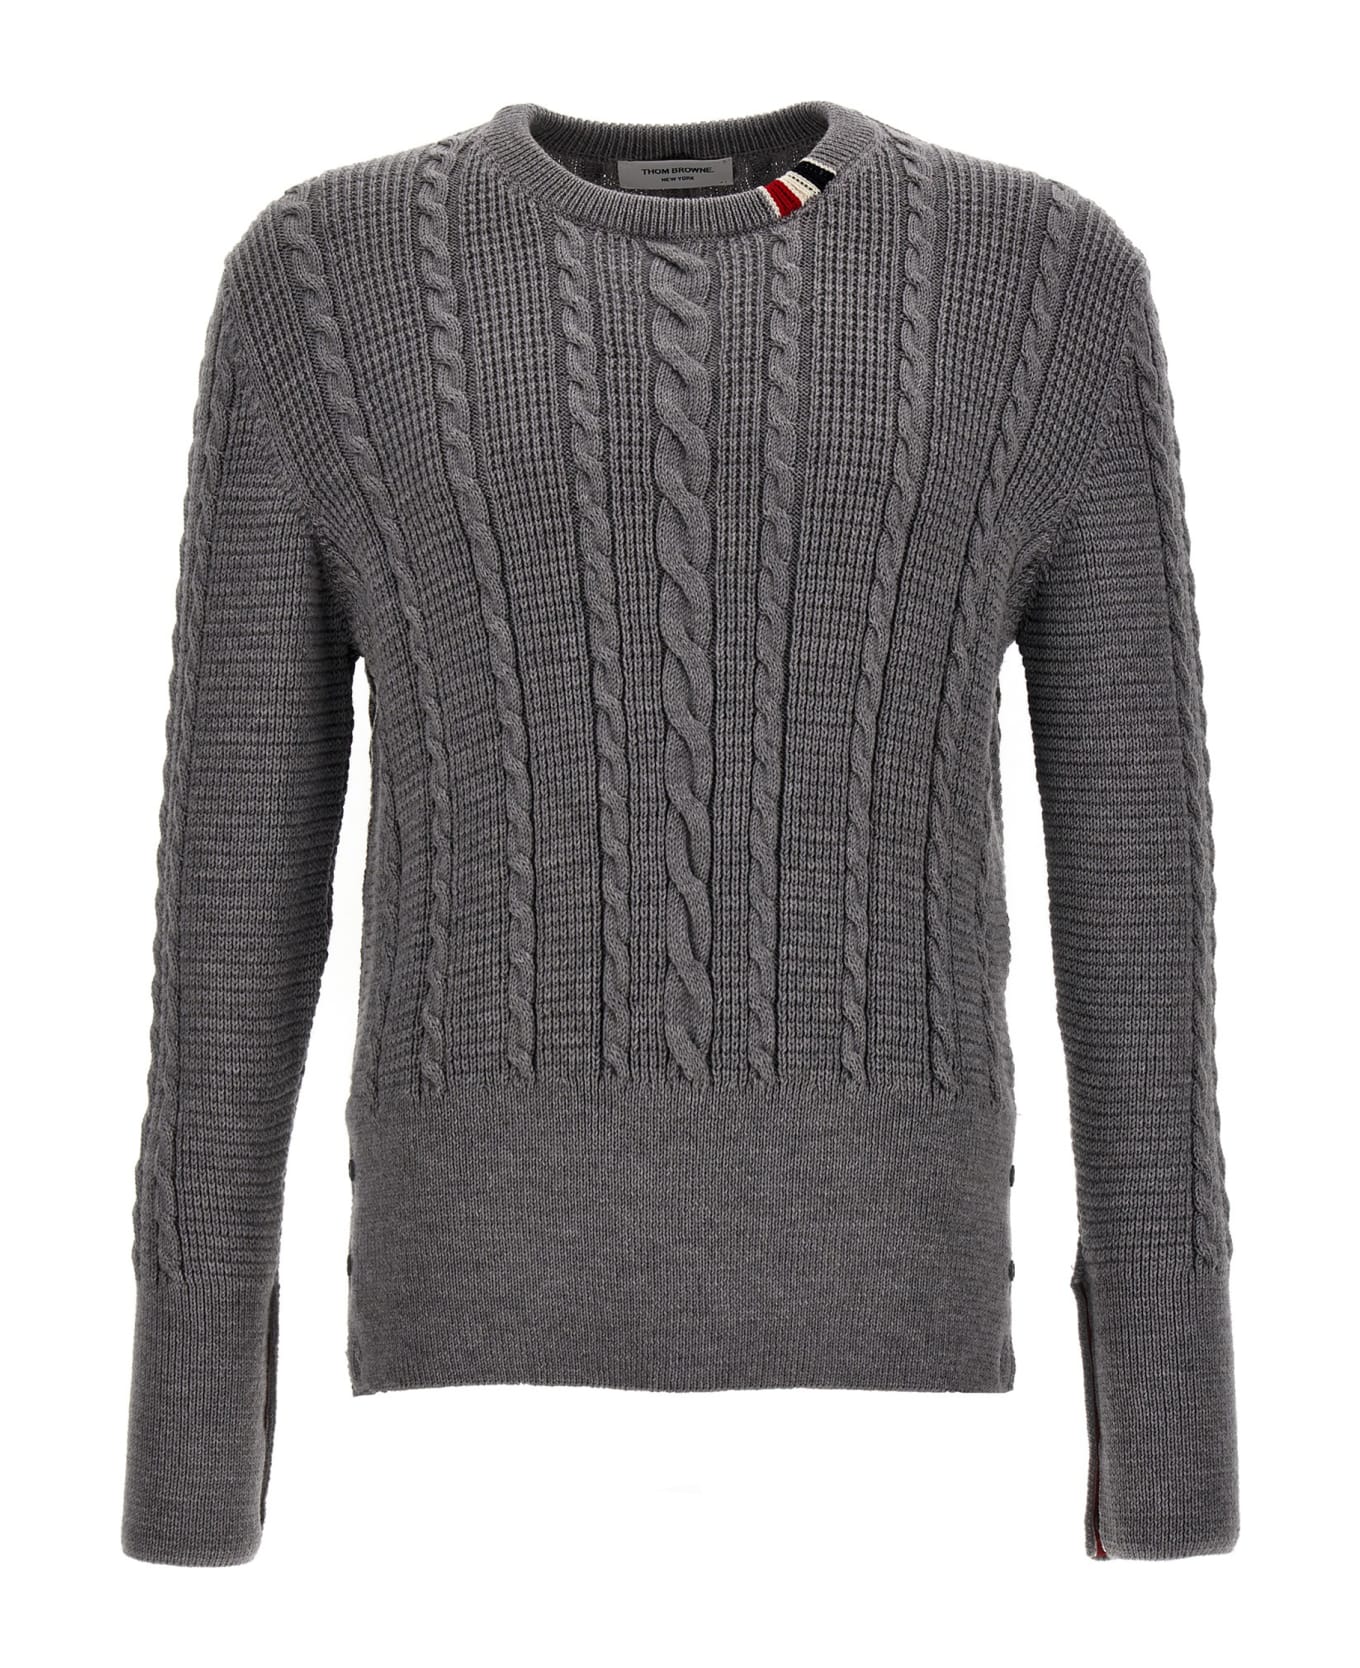 Thom Browne 'cable' Sweater - Gray